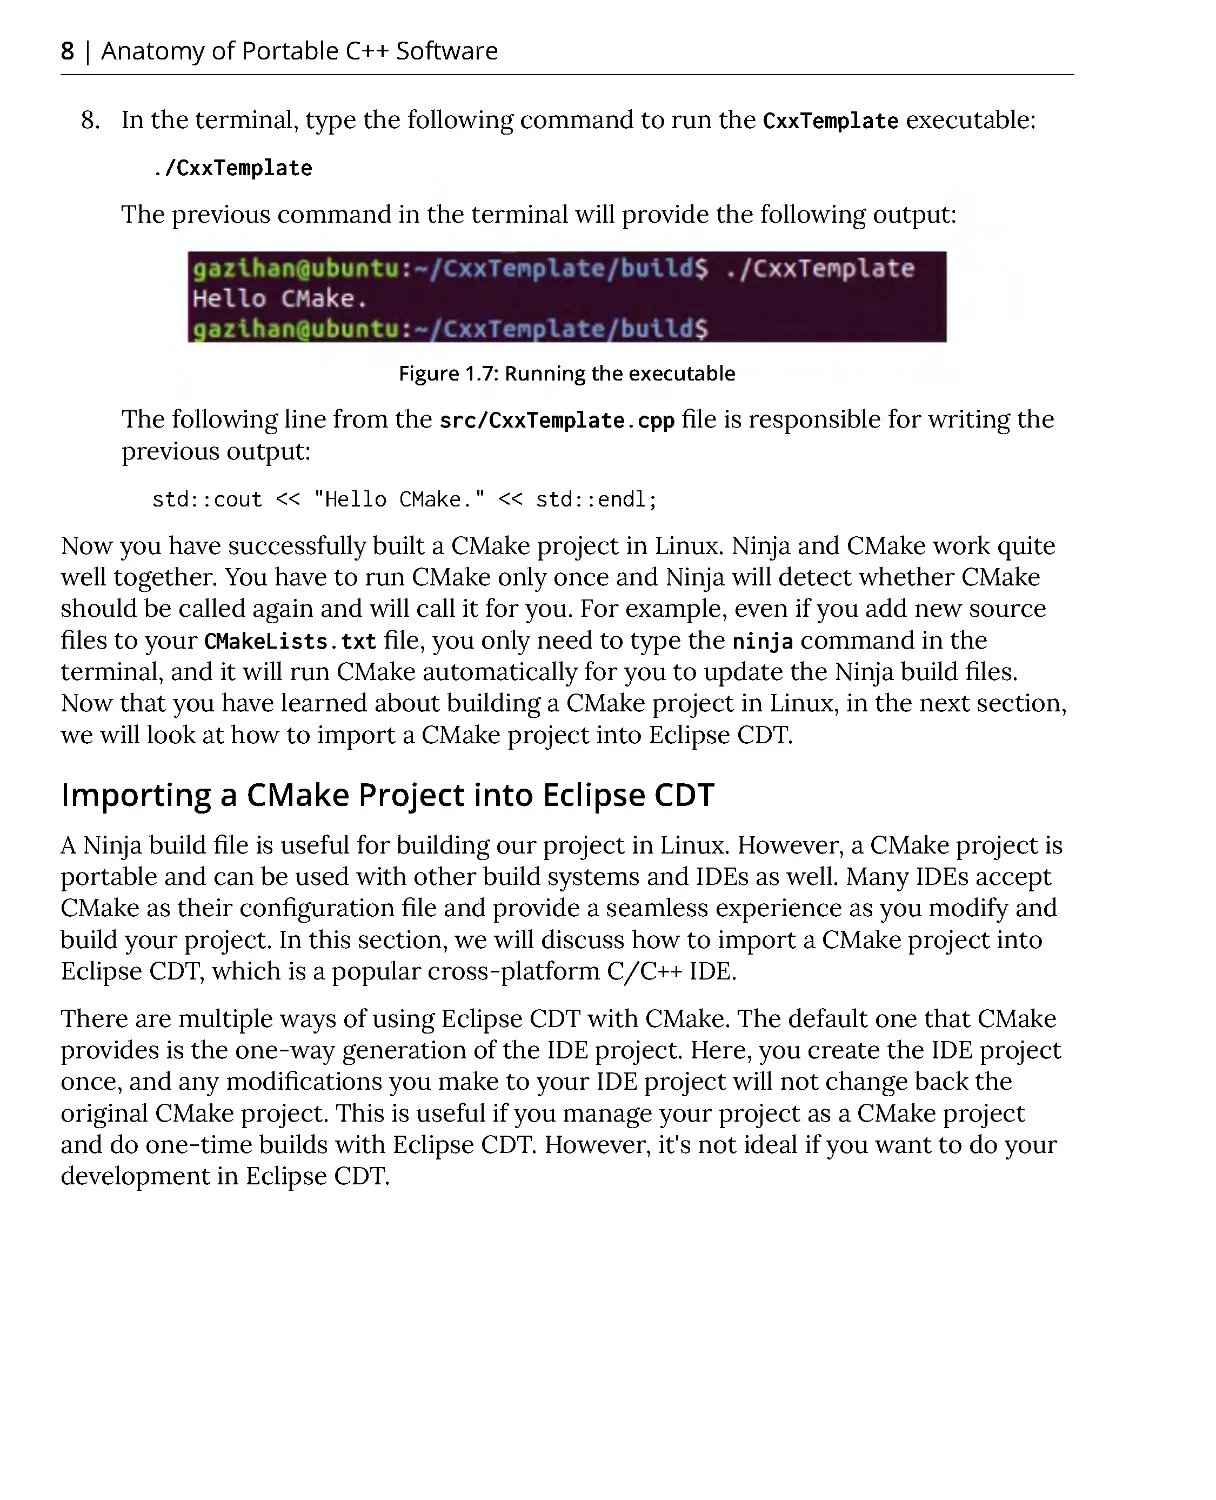 Importing a CMake Project into Eclipse CDT